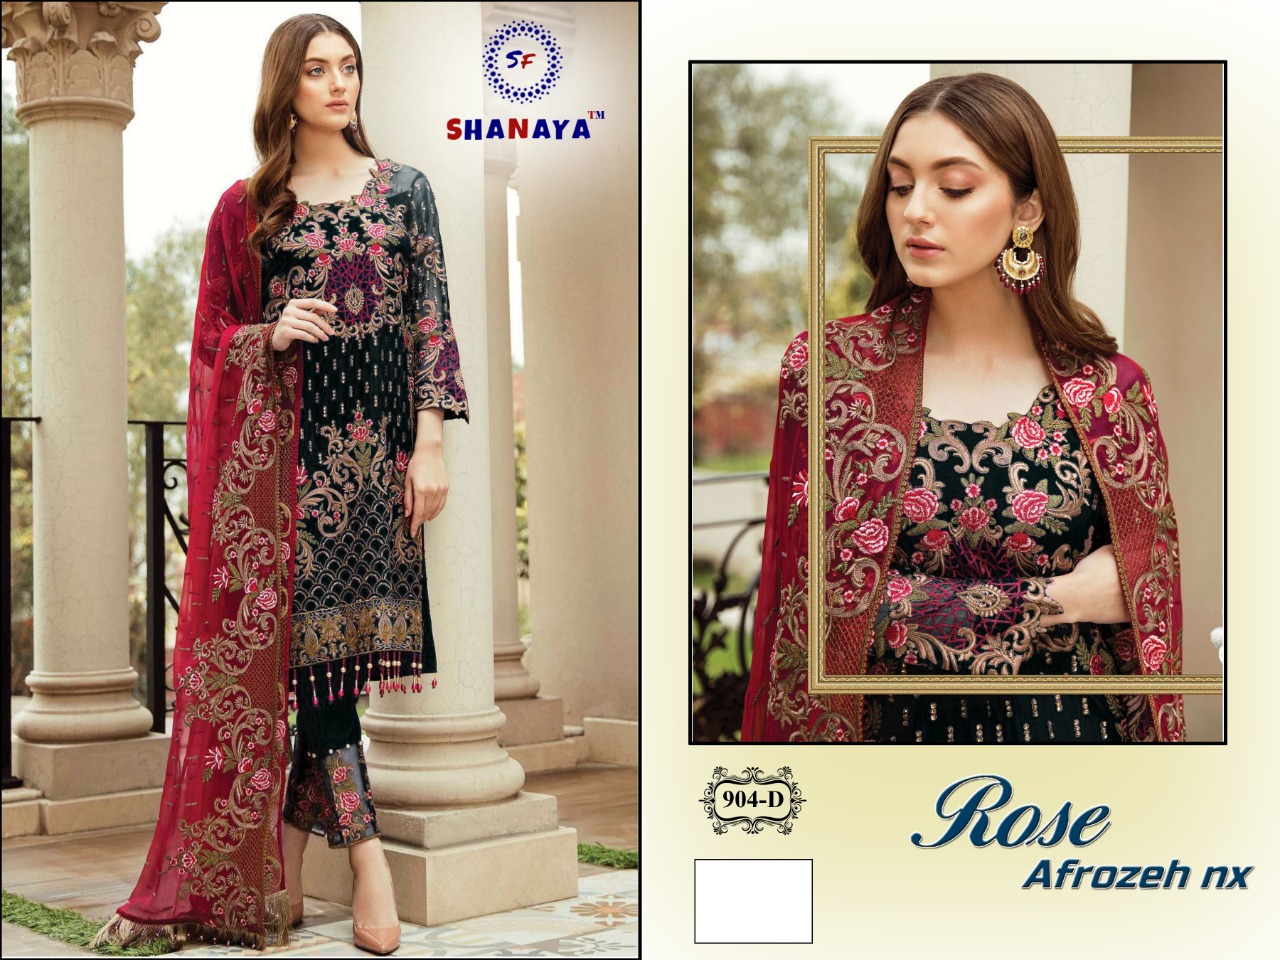 Shanaya Fashion Rose afrozeh Nx classy catchy look Pakistani concept Salwar suits in wholesale prices